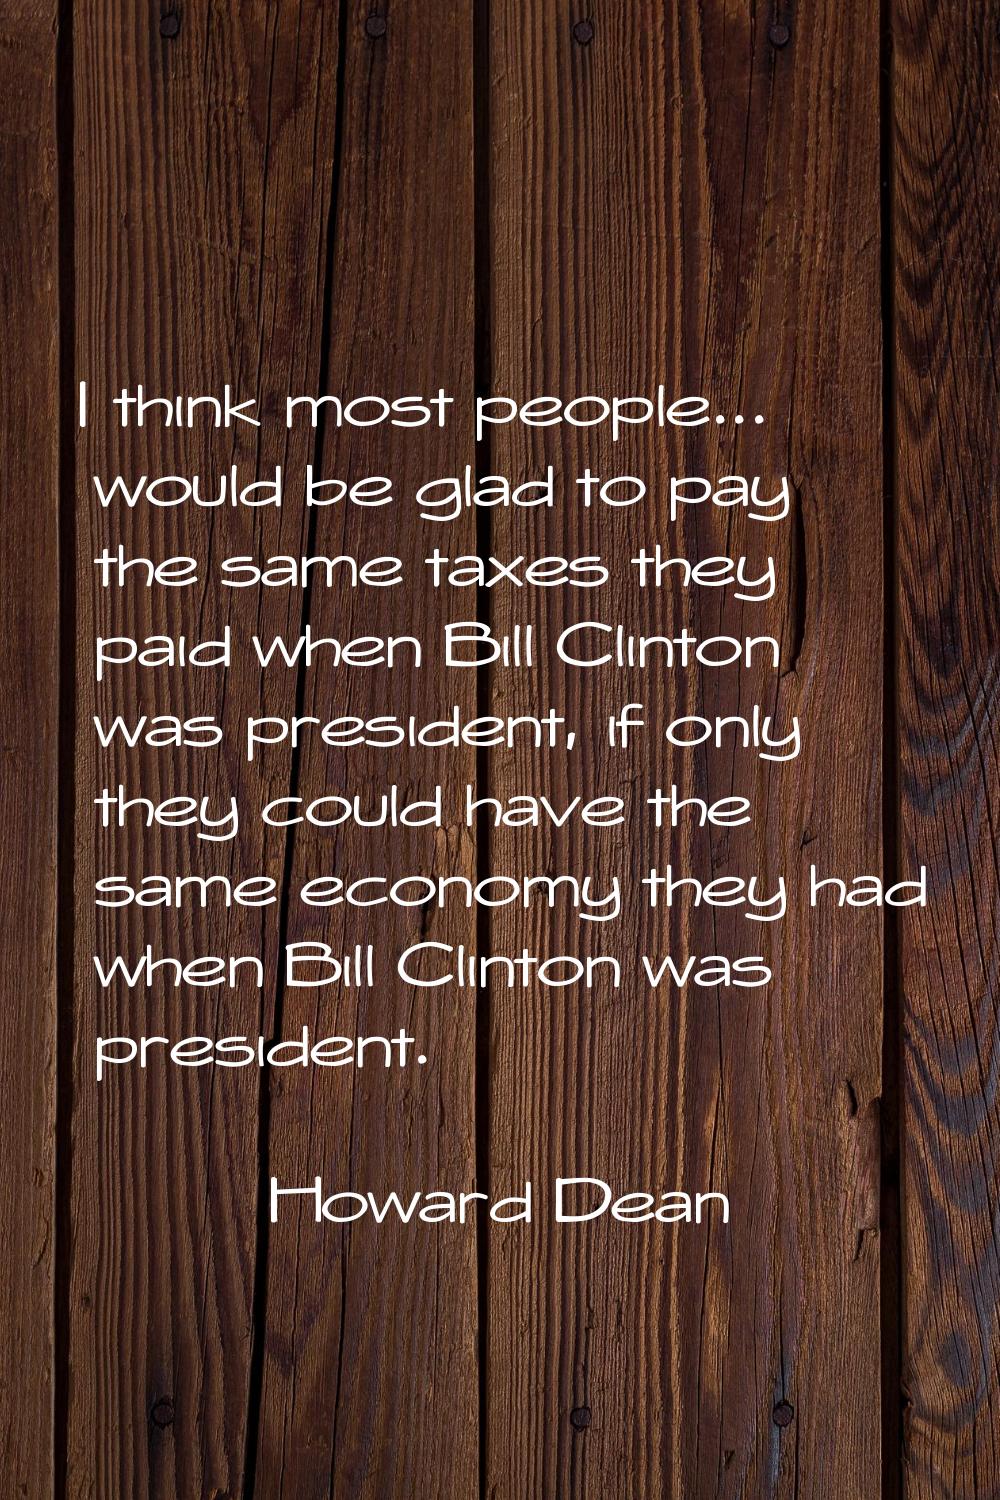 I think most people... would be glad to pay the same taxes they paid when Bill Clinton was presiden